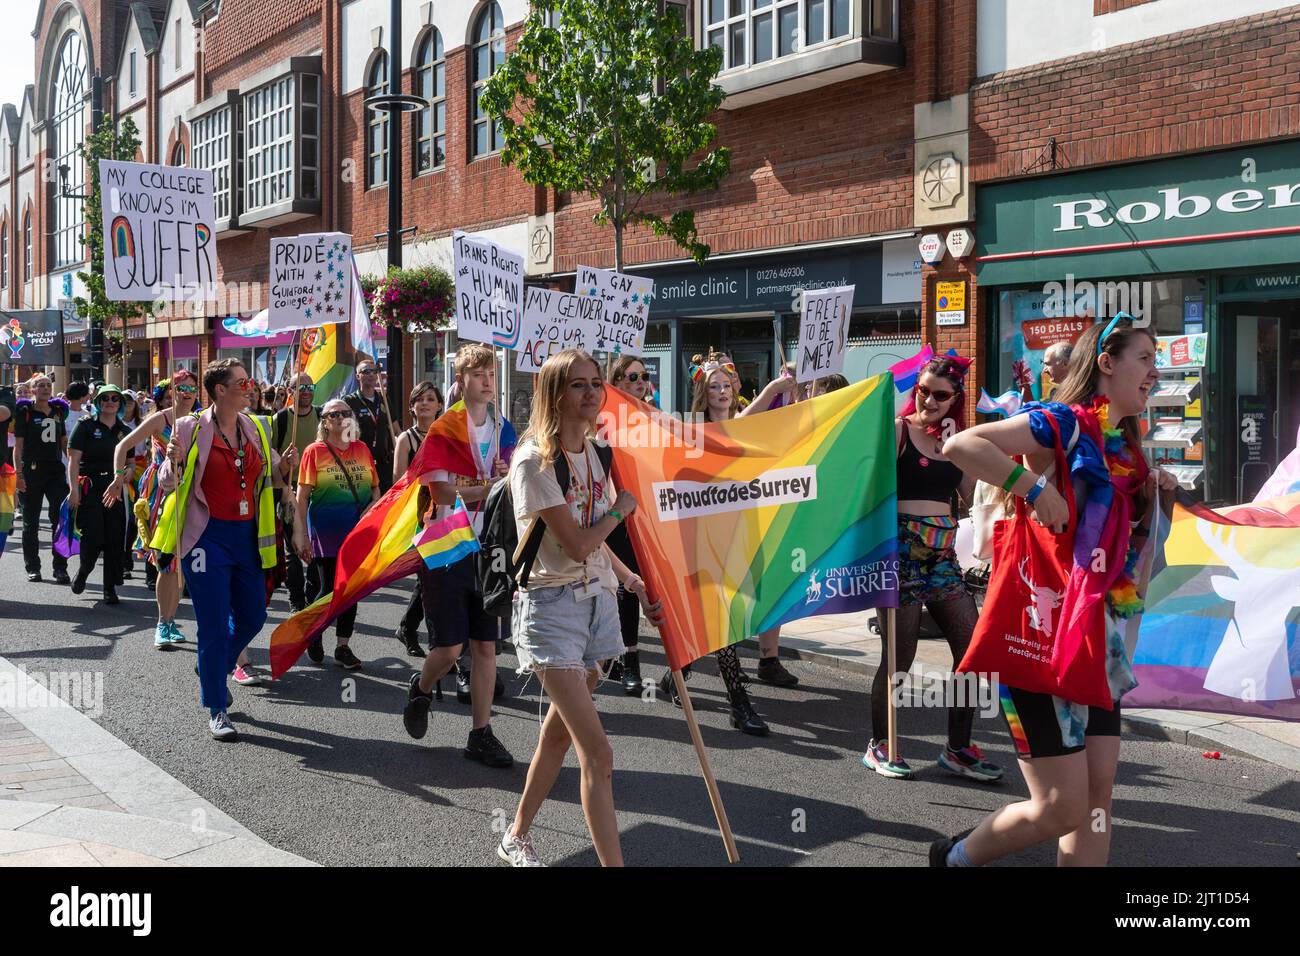 Pride in Surrey parade in Camberley Town on 27th August 2022, Surrey, England, UK. People in colourful costumes march for LGBTQ+ rights. Stock Photo